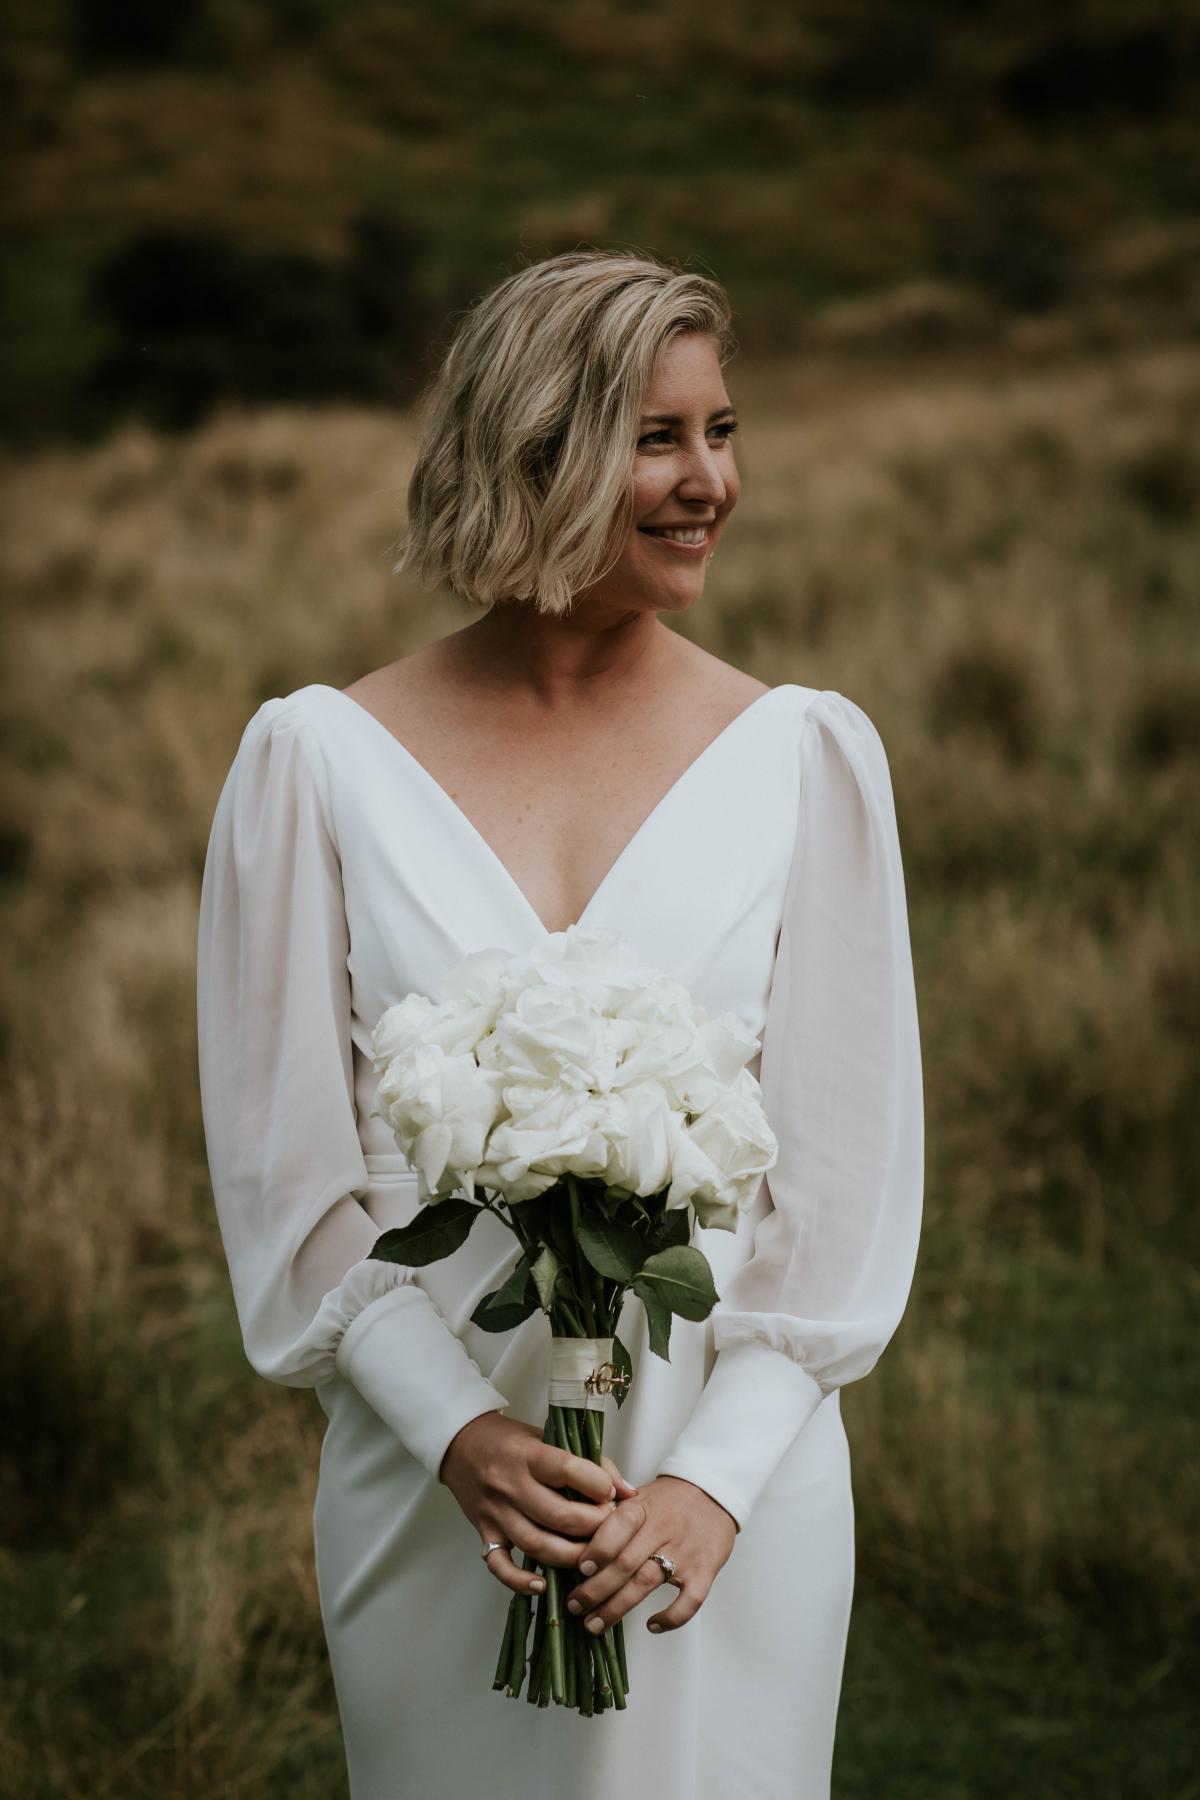 KWH real bride Lauren holding bridal bouquet in Nikki wedding dress. The gown features a wrap style with chiffon sleeves and front split.